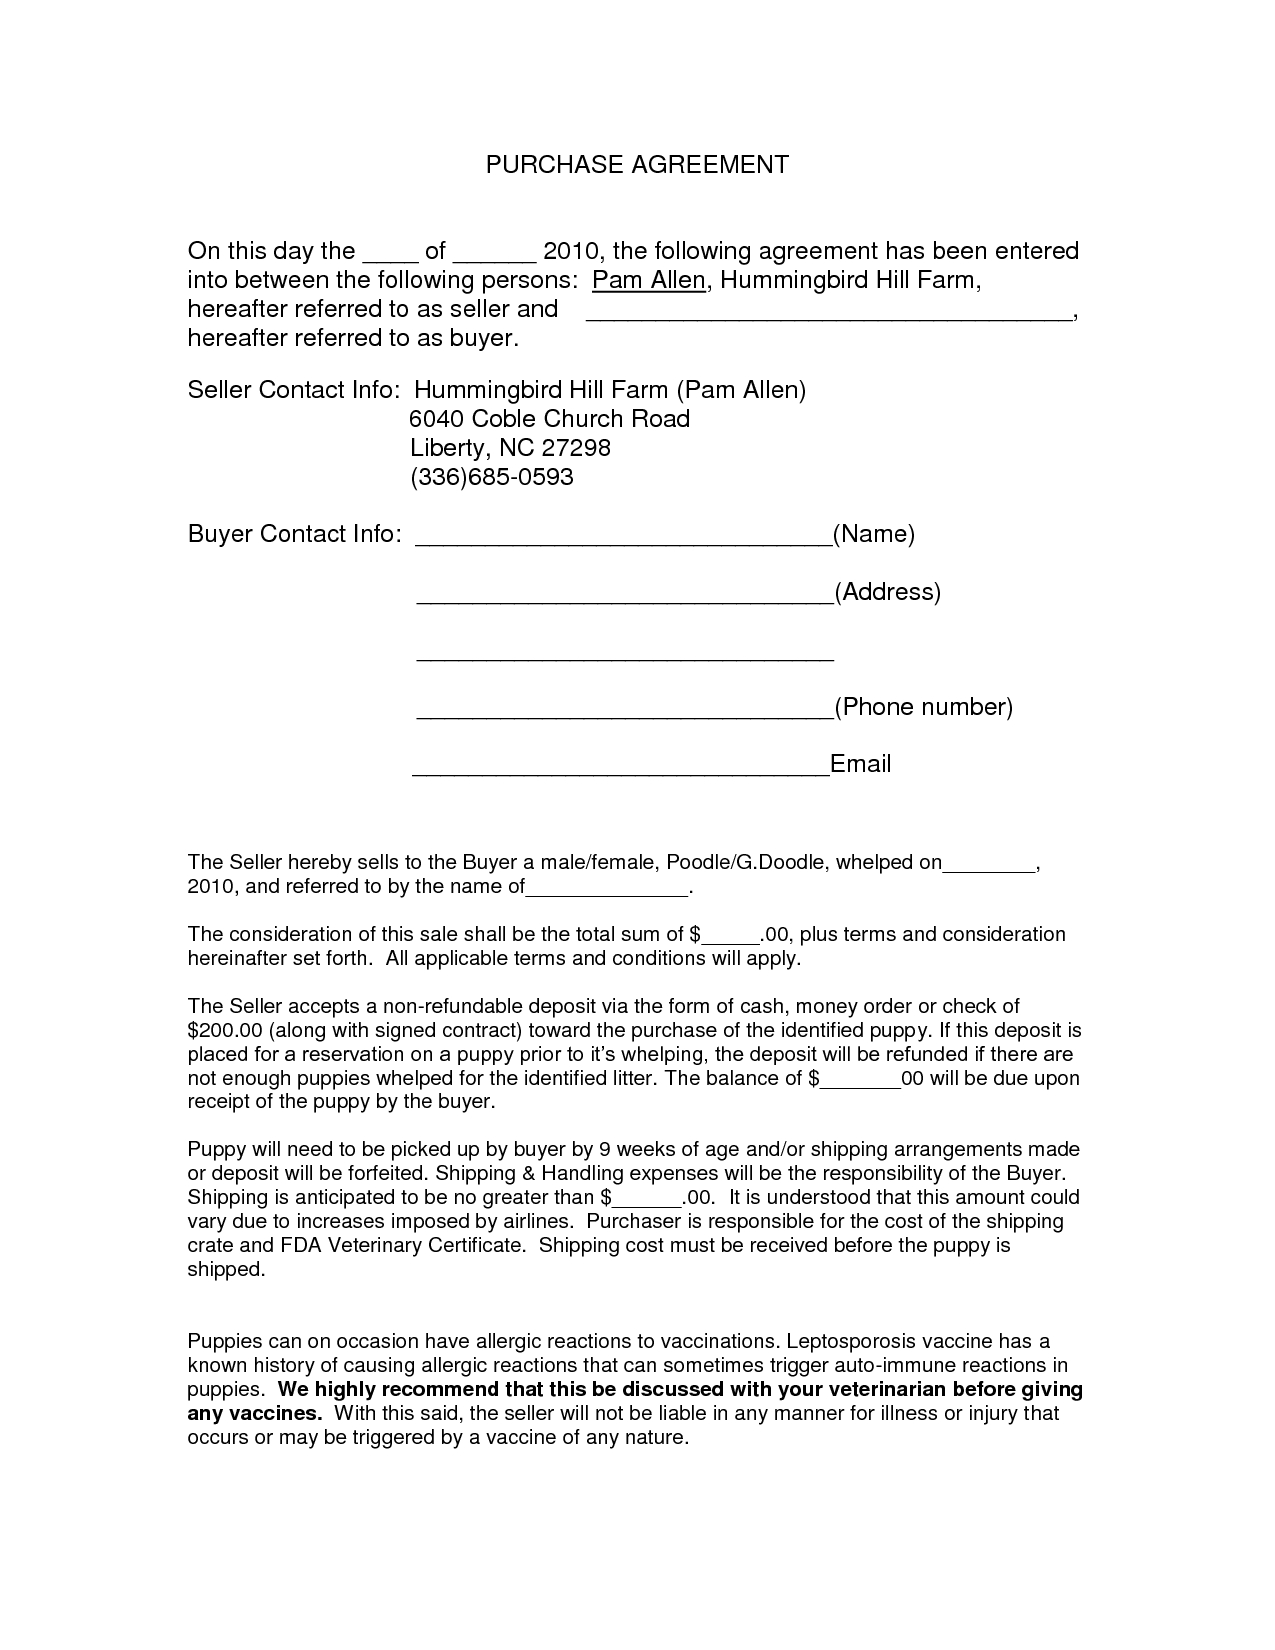 Auto Purchase Agreement Form  Docnyy  Purchase Contract inside Car Purchase Agreement Template